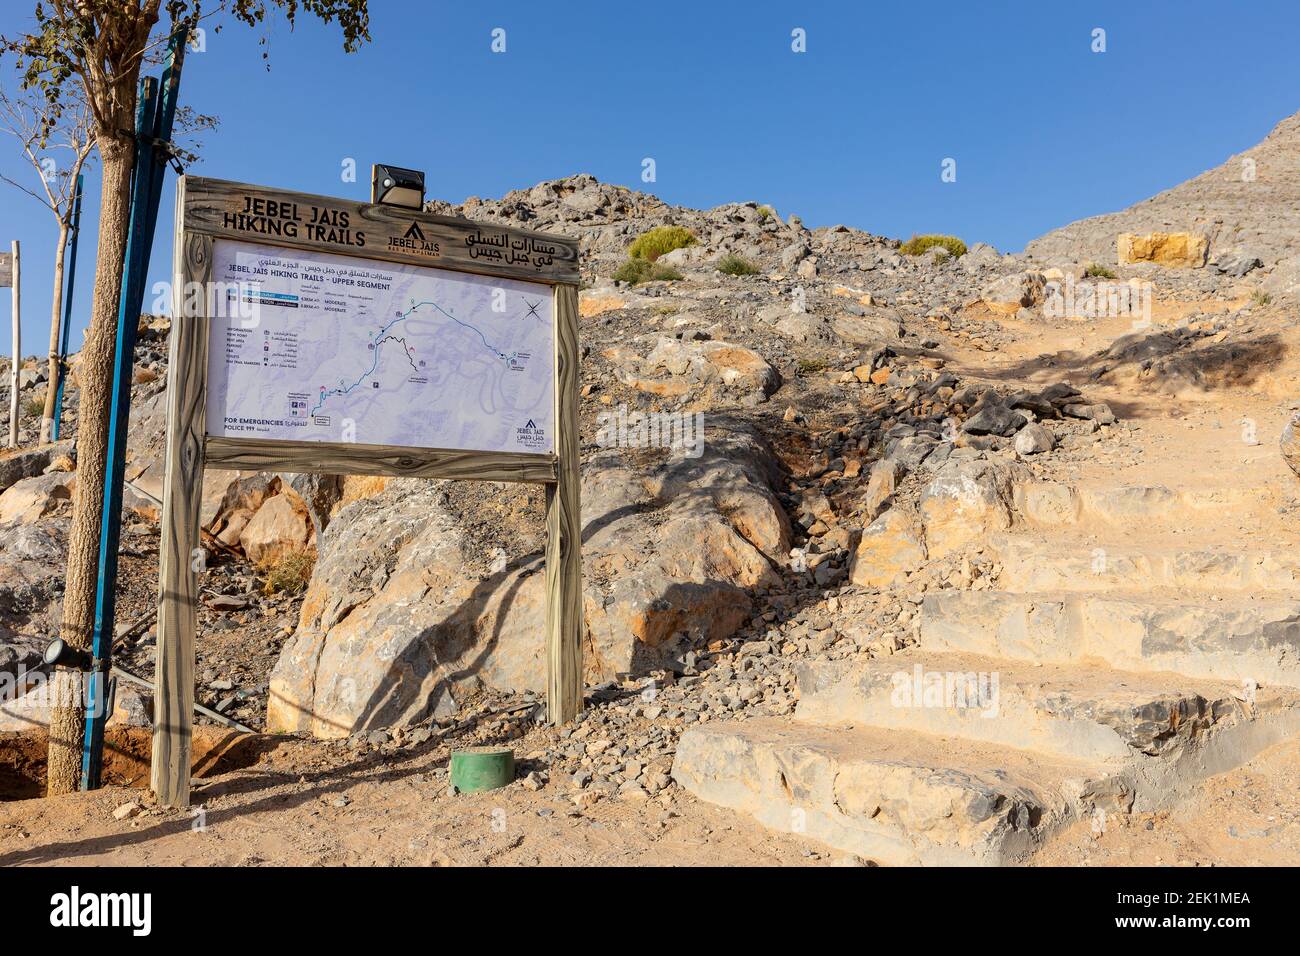 Jebel Jais, UAE, 24.01.2021. Jebel Jais hiking trails tourist information board with trails map and stone stairs footpath. Stock Photo